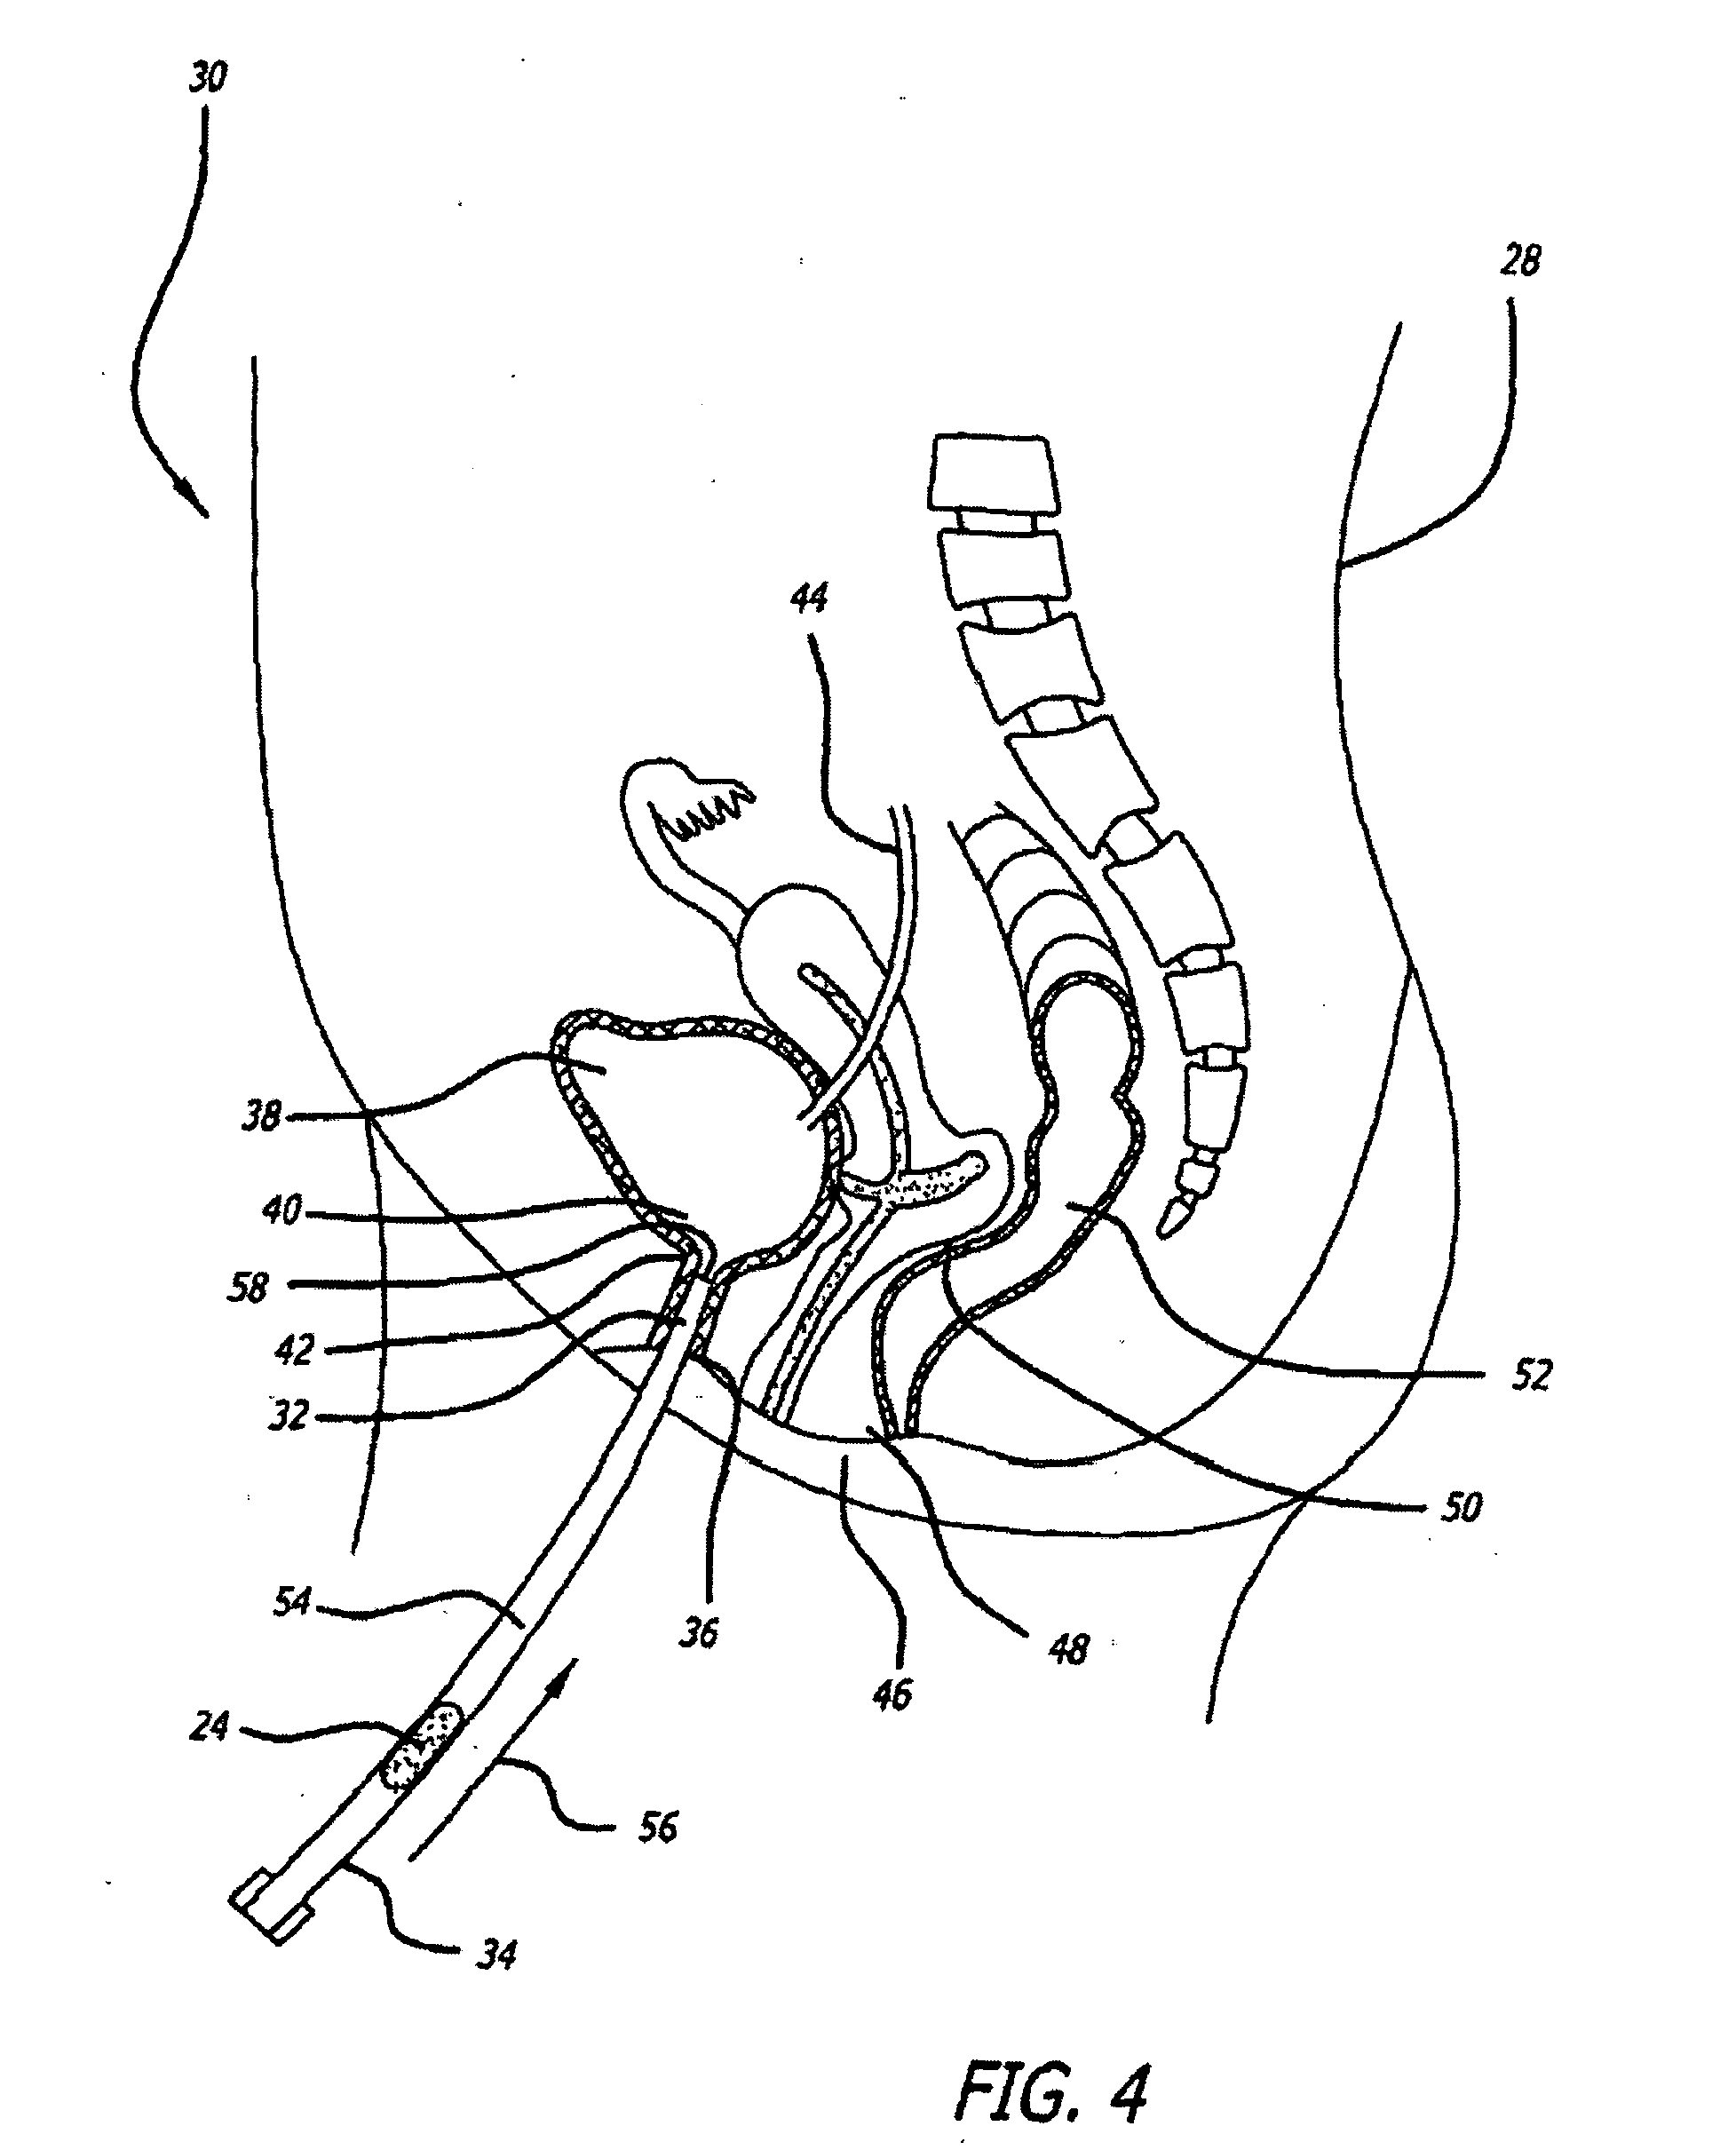 Transluminal drug delivery methods and devices